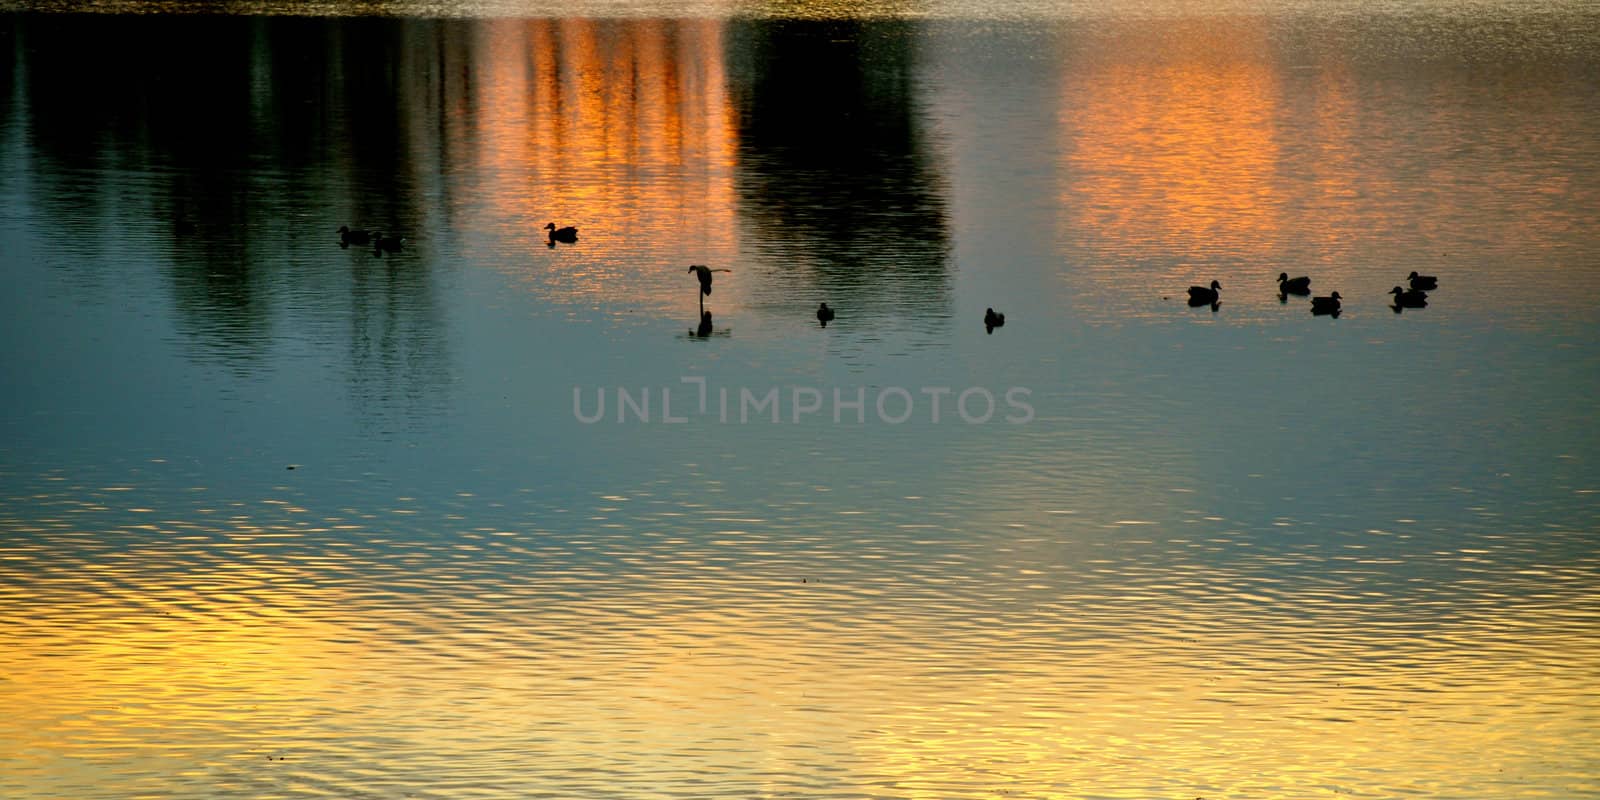 Ducks on the water by RefocusPhoto